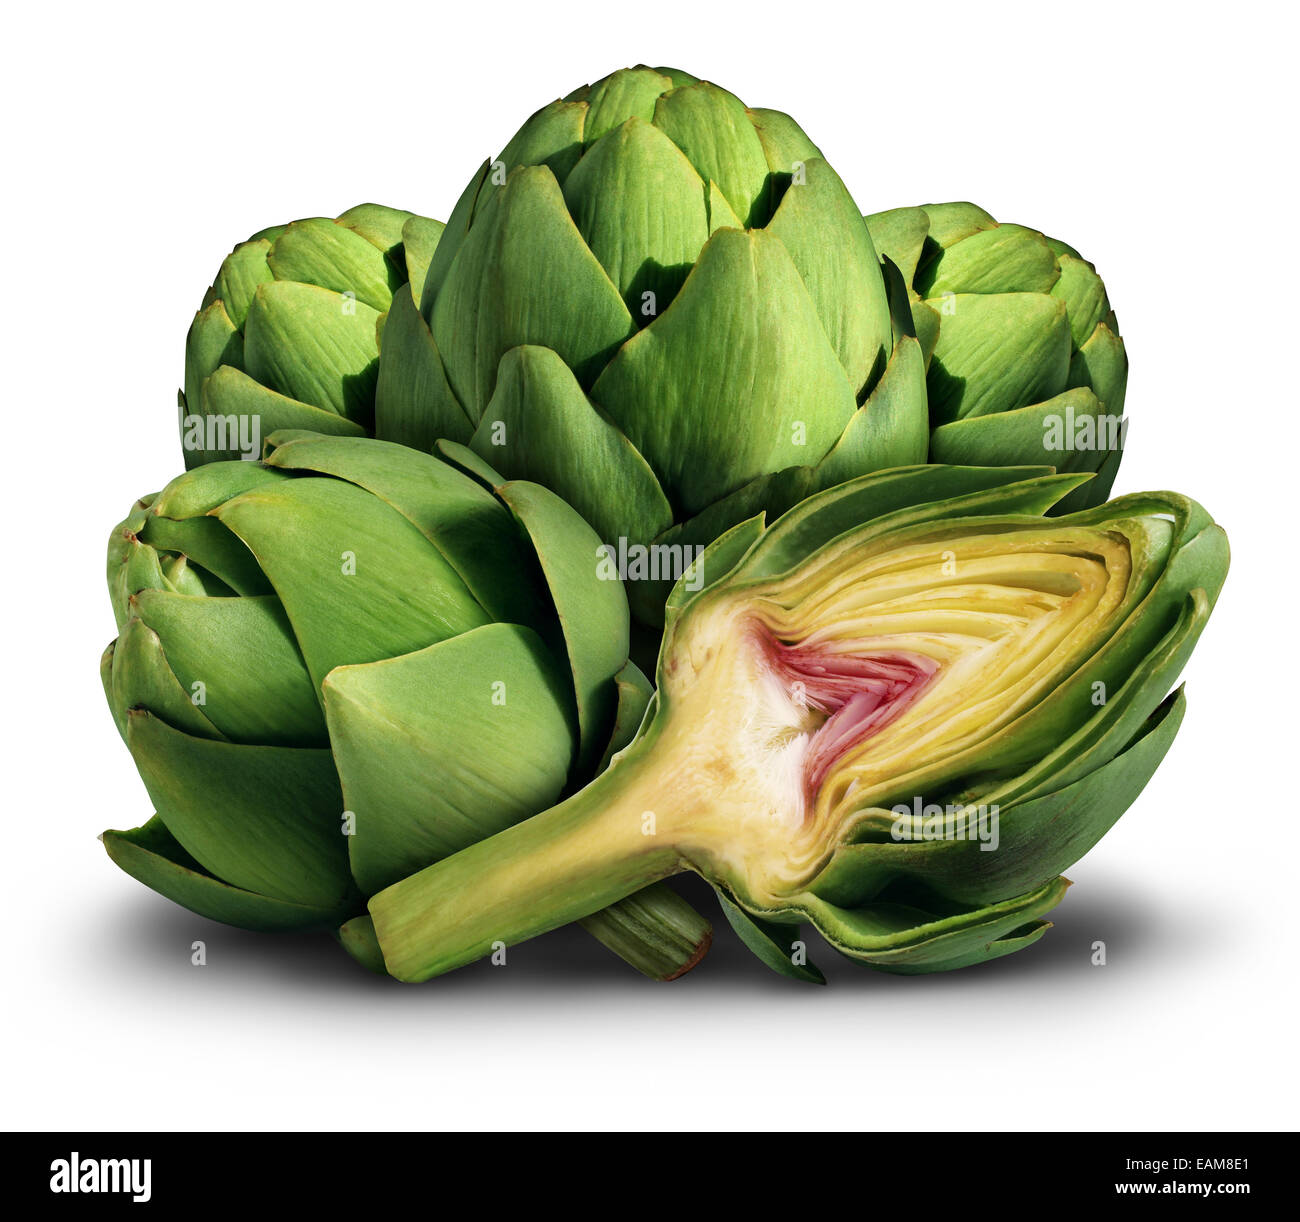 Artichoke fresh healthy food as a symbol of the mediterranean diet or eating nutritious market green vegetables as a bunch of produce on a white background. Stock Photo